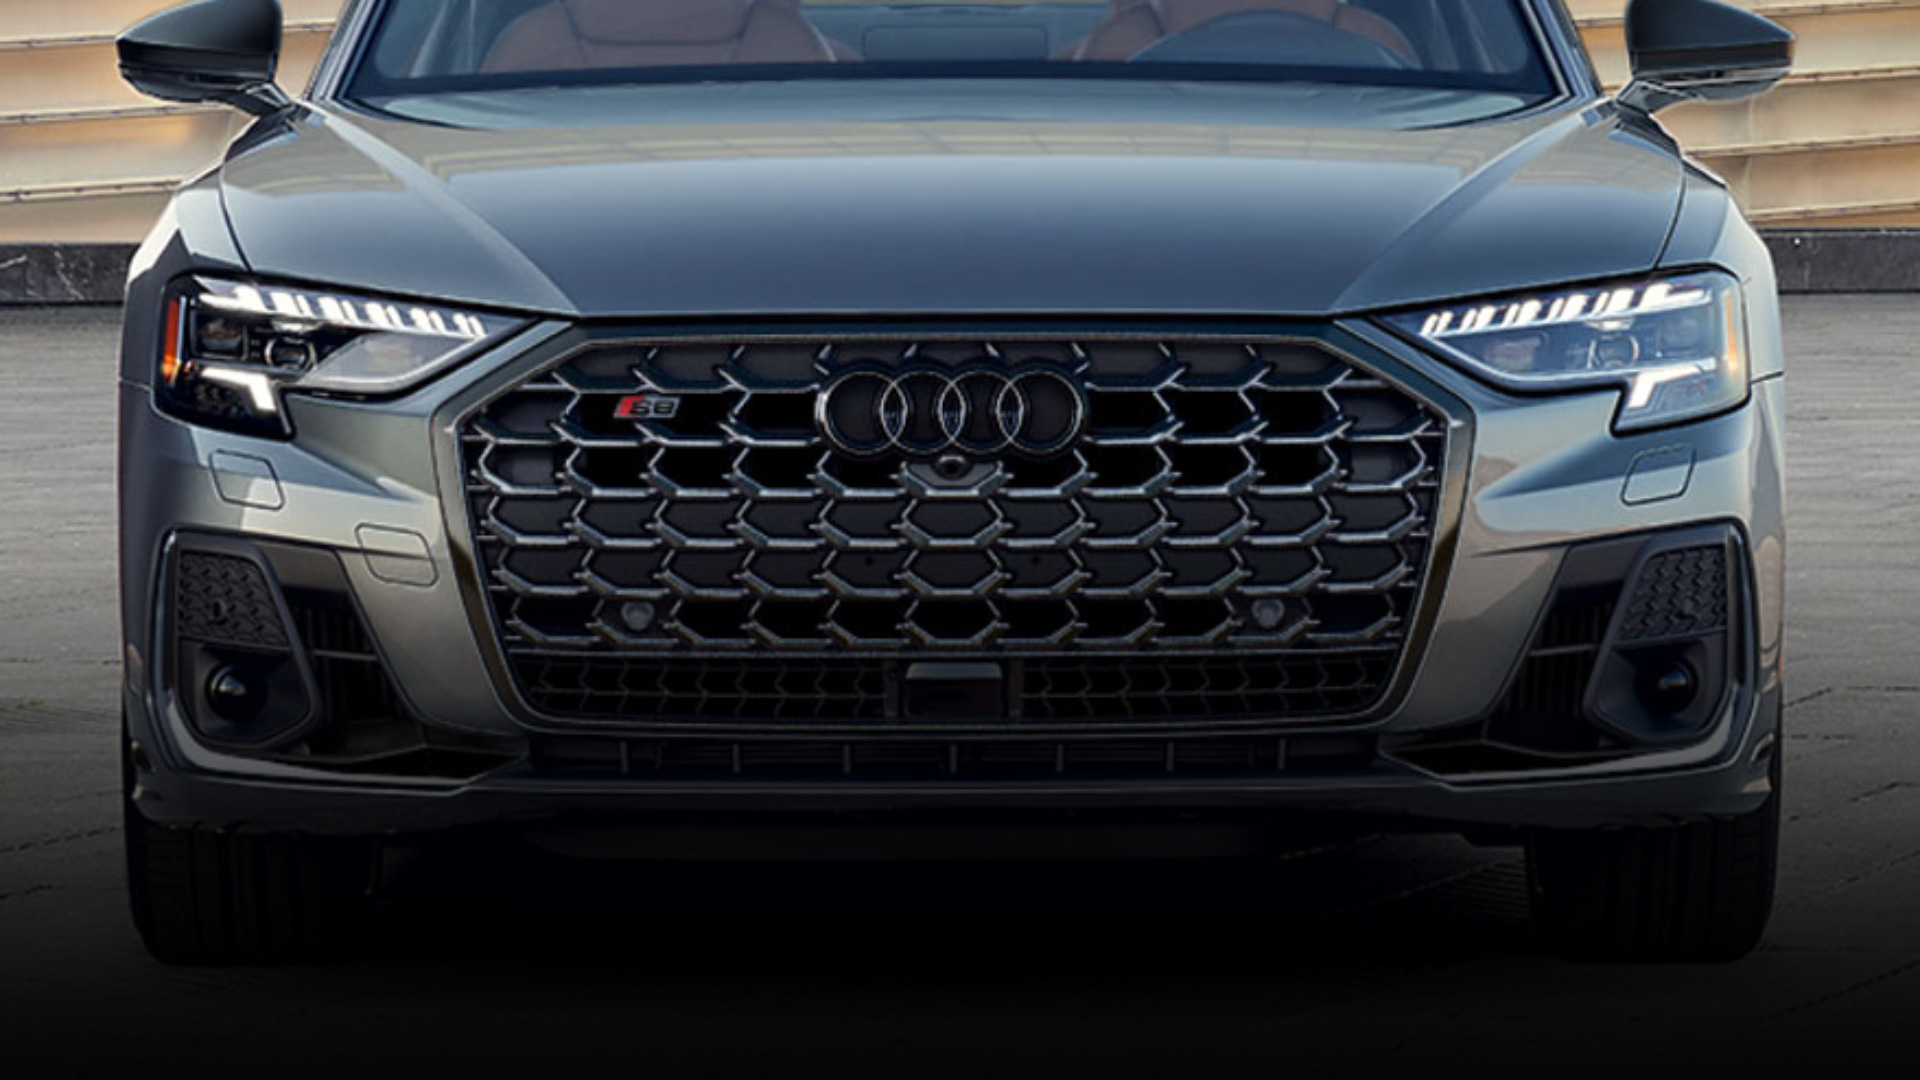 Close-up of the grille and Digital matrix-design LED headlights on an Audi S8.